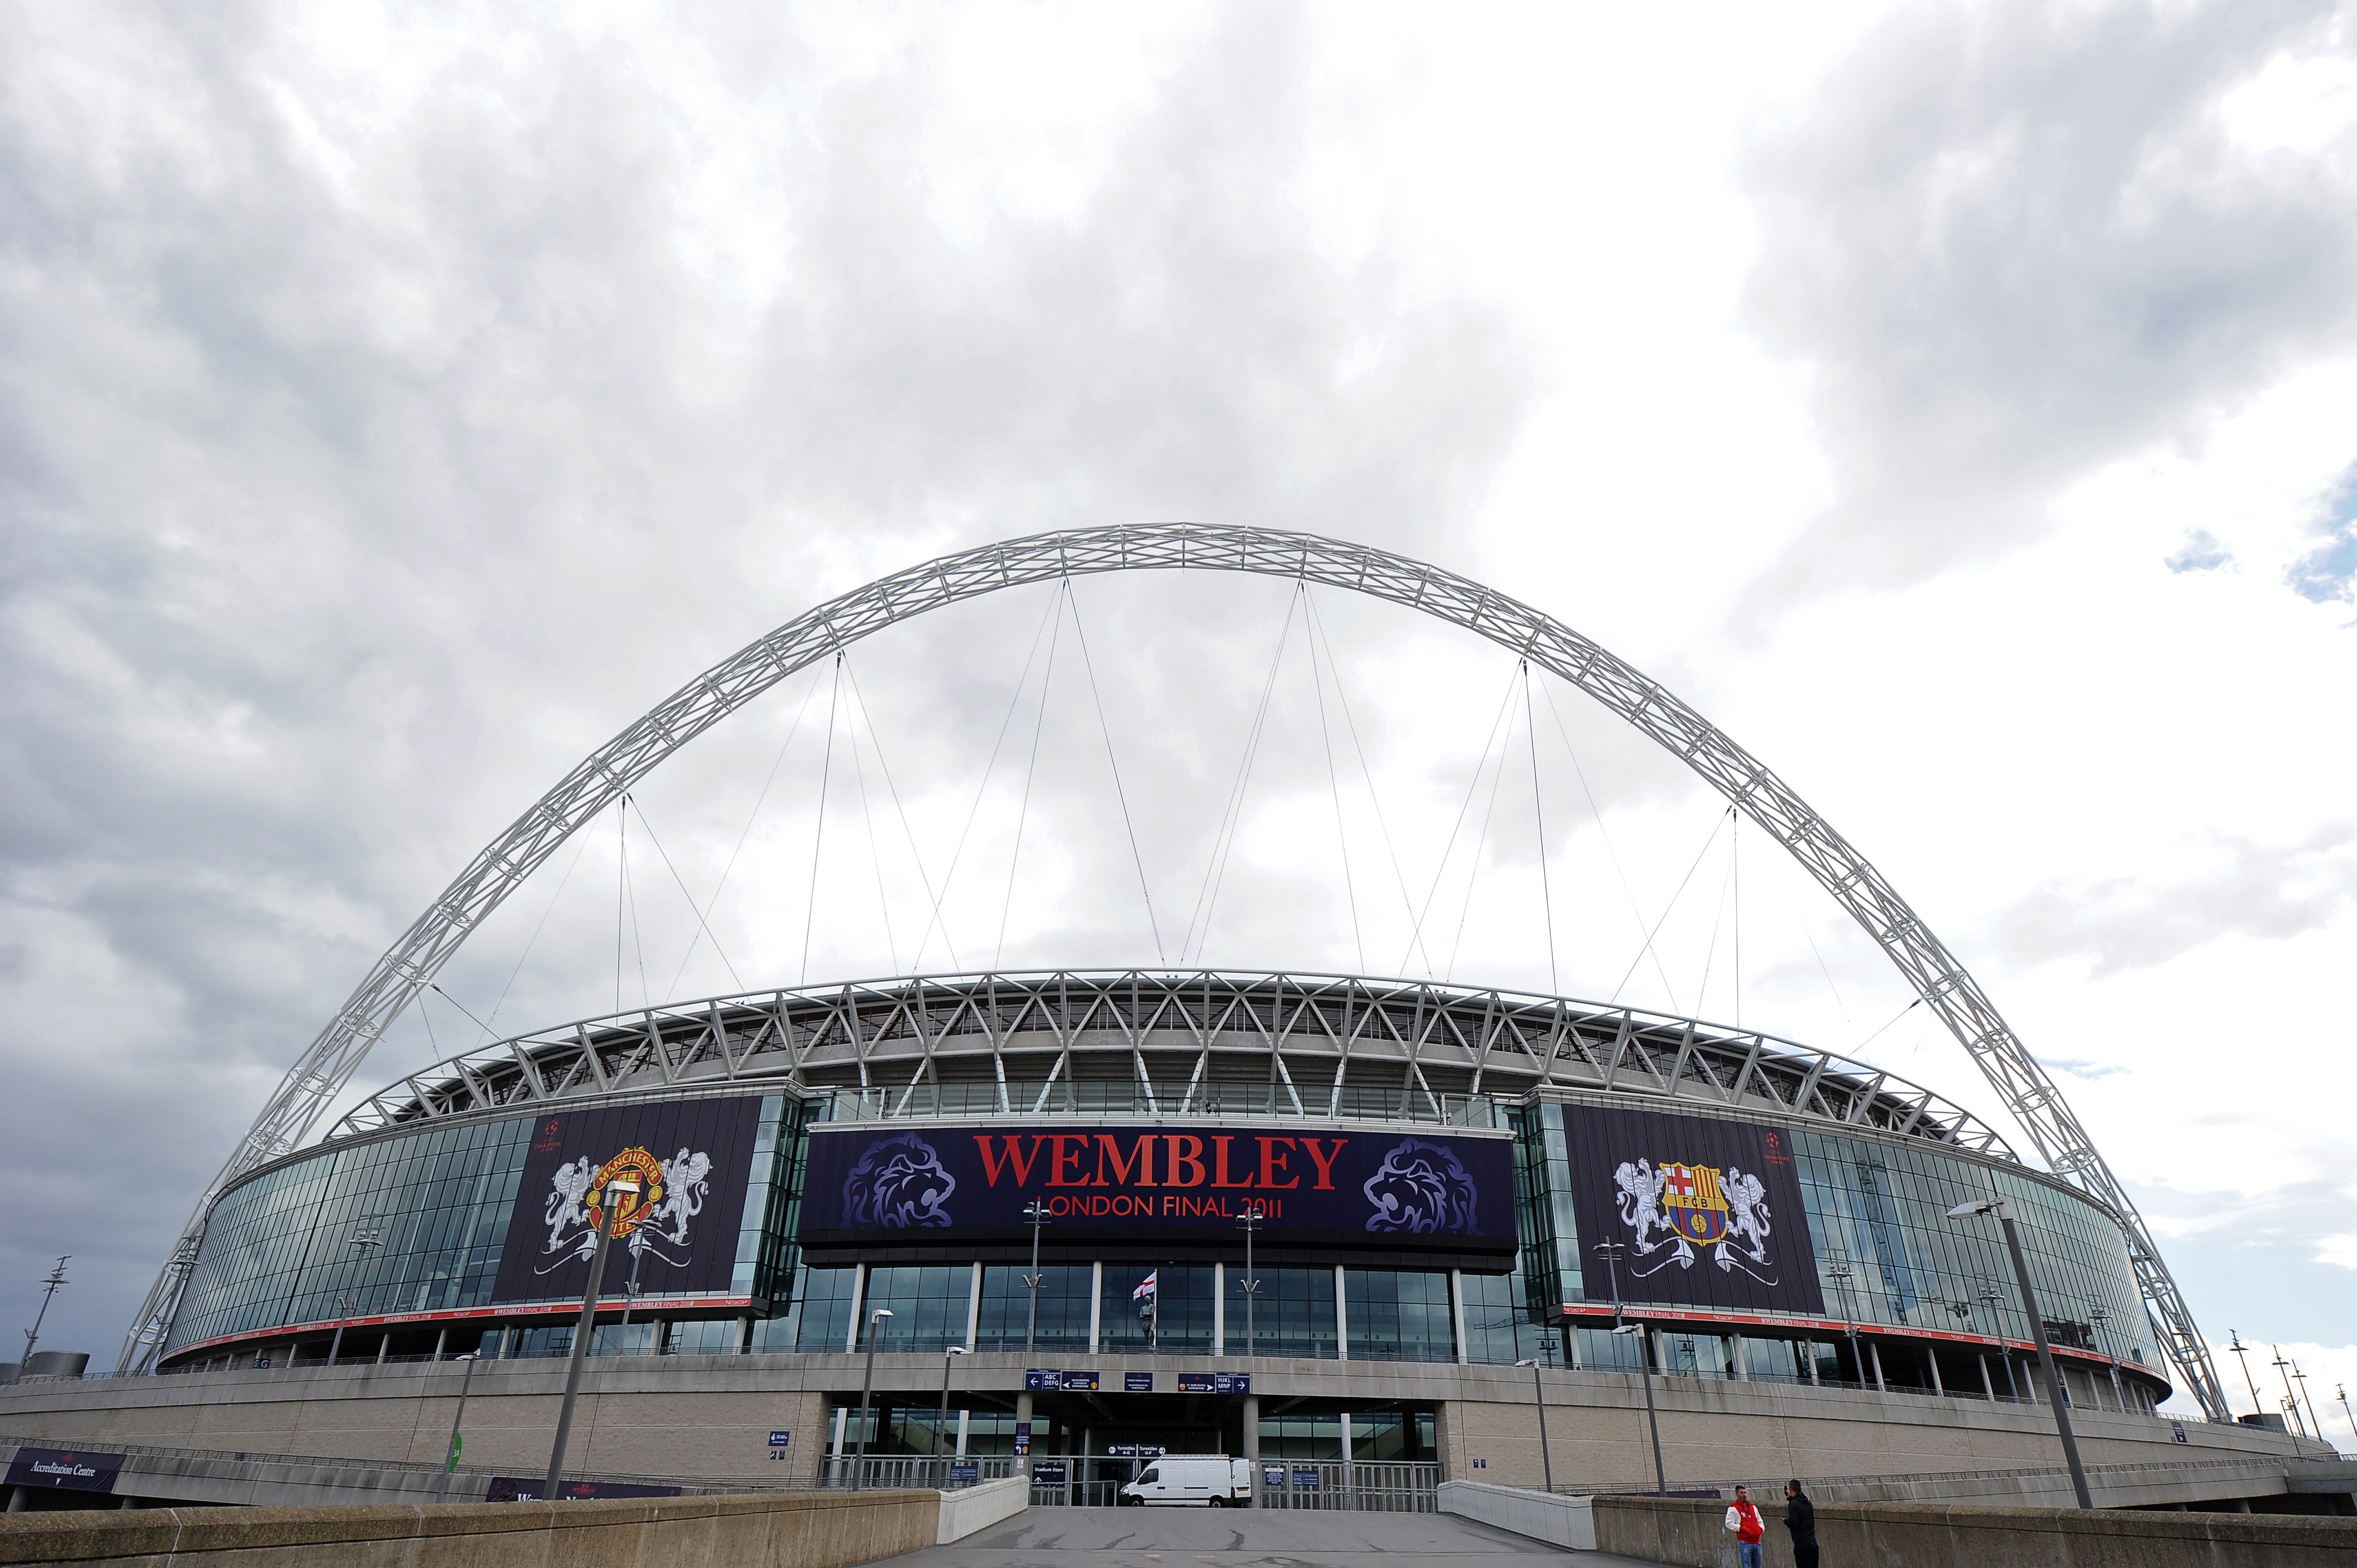 A general view shows Wembley stadium on May 26, 2011 in London. Manchester United and Barcelona face each other in the UEFA Champions League final at Wembley on May 28, 2011.   AFP PHOTO/ FRANCK FIFE        (Photo credit should read FRANCK FIFE/AFP/Getty Images)